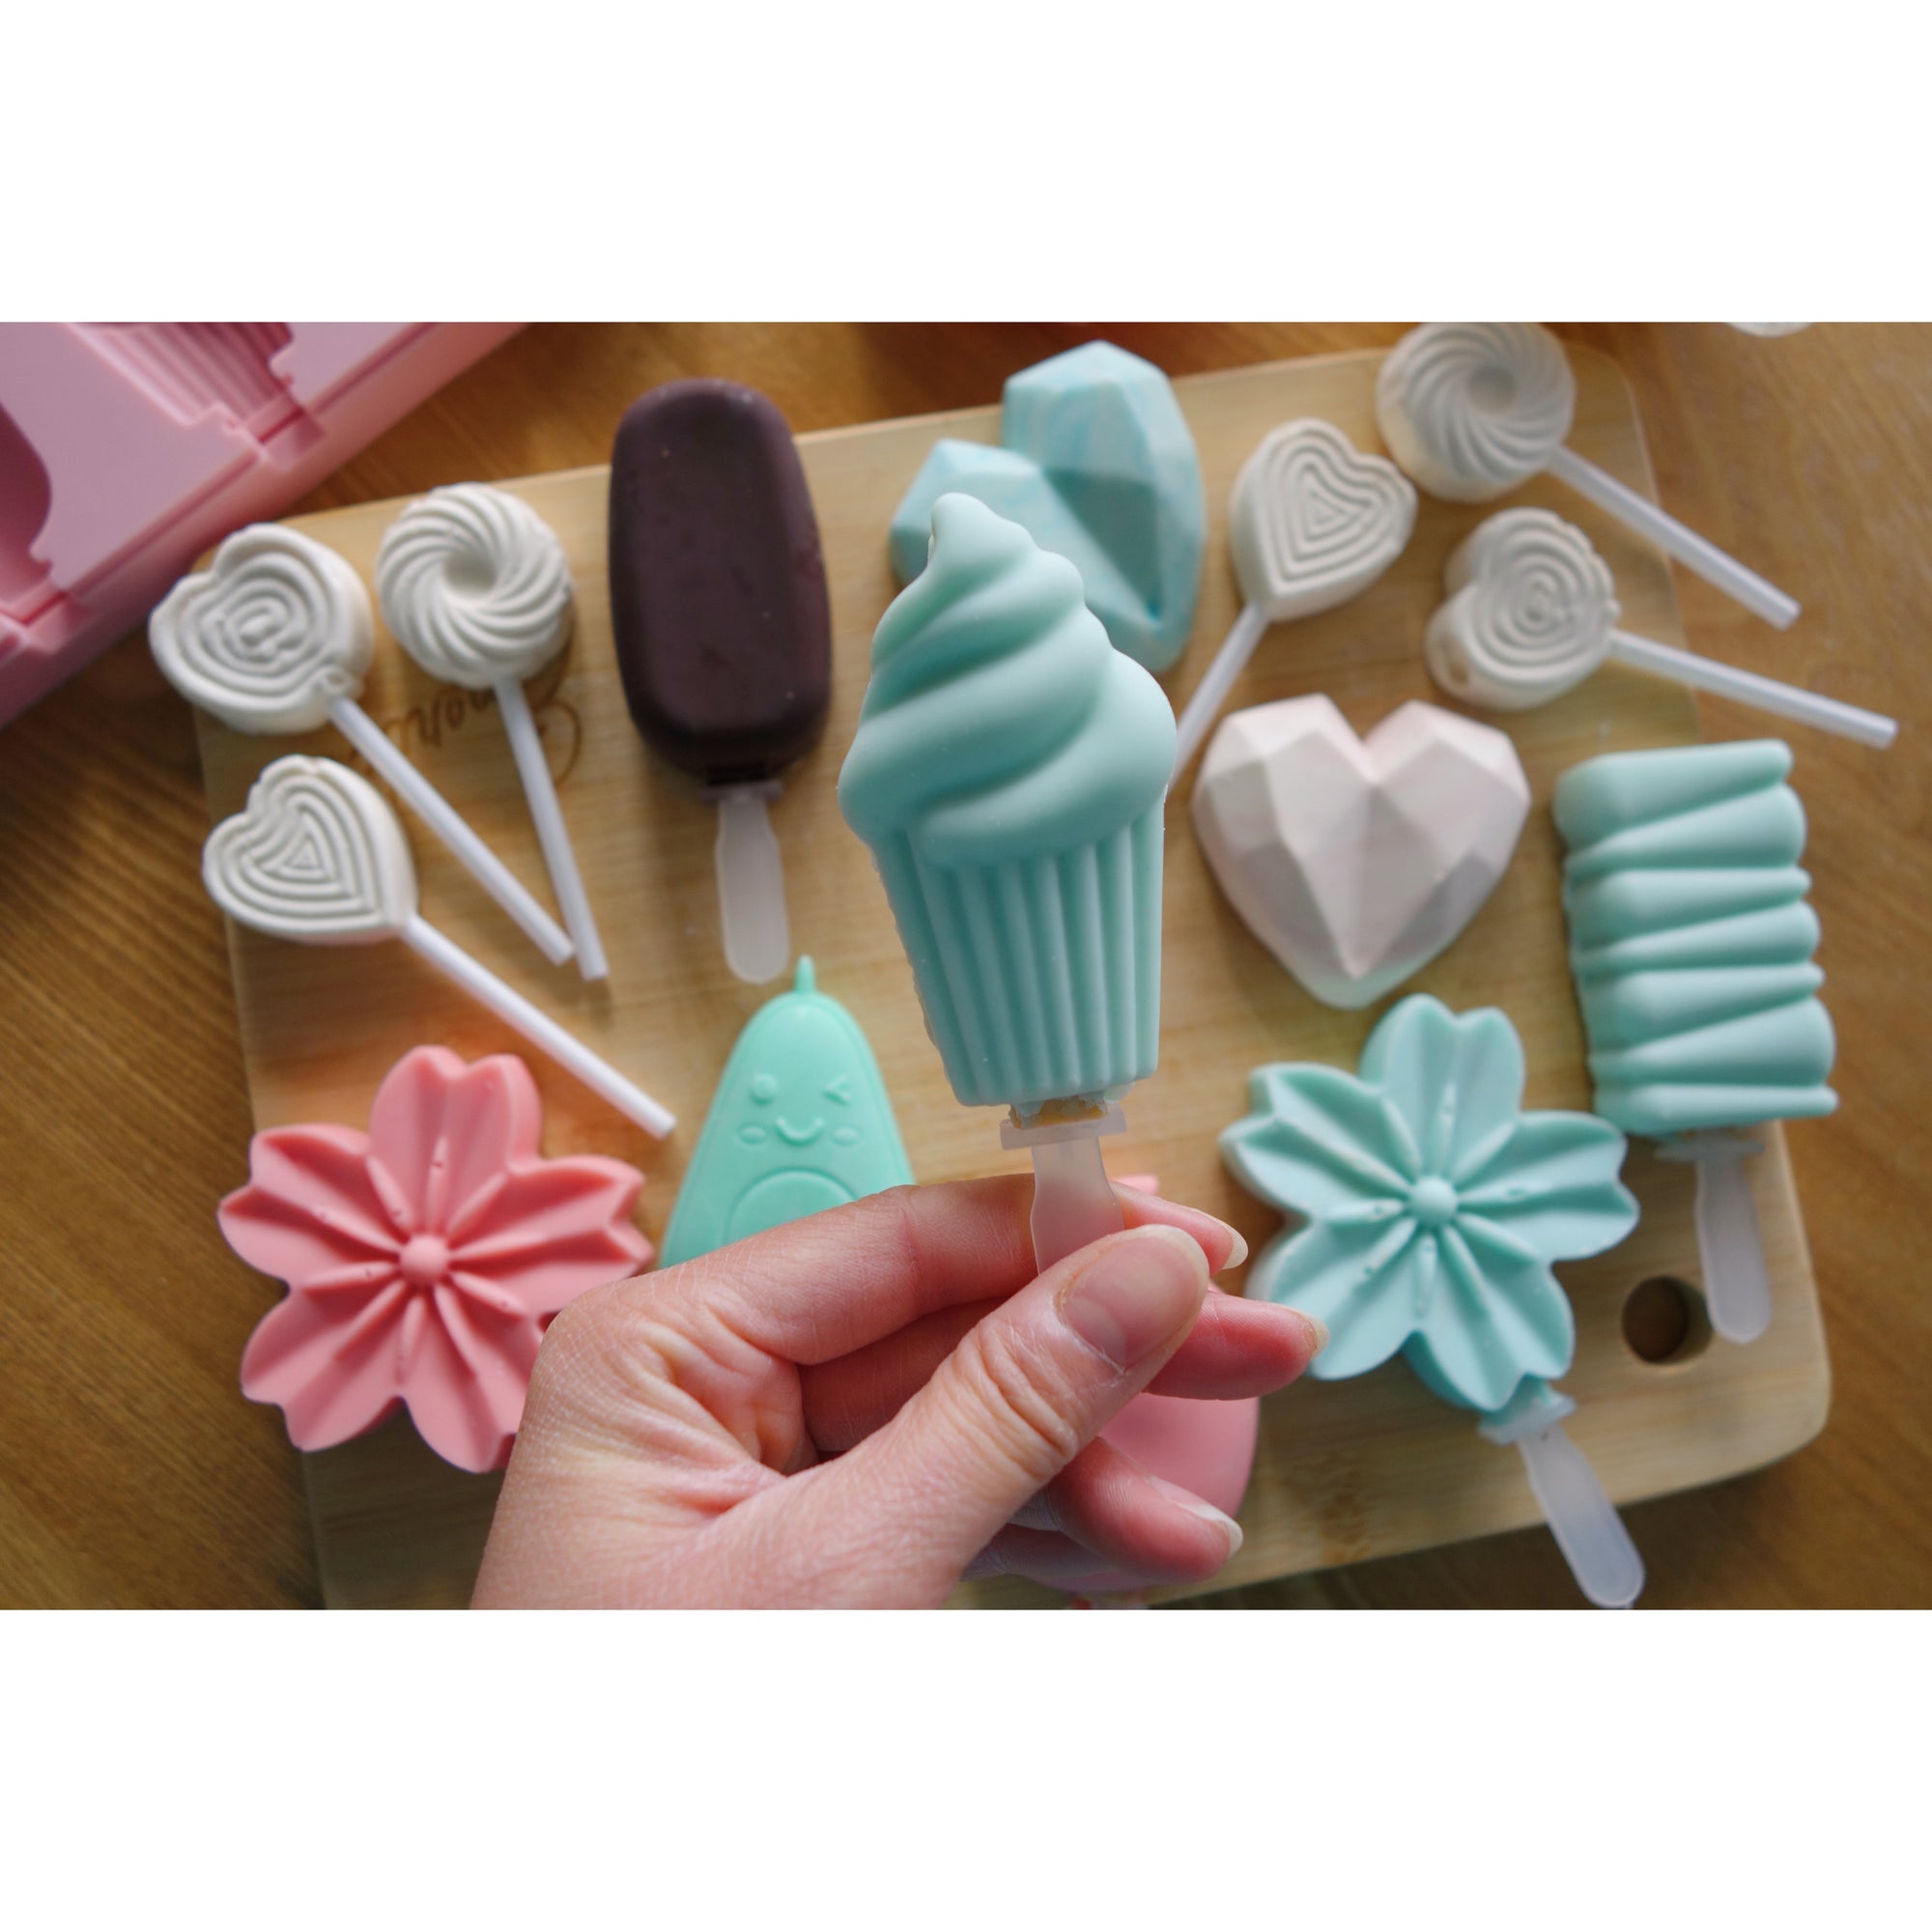 Silicone Cake Pop & Cakesicle Mold - Popsicle, Cupcake & Rectangle Shapes,  Bonus Lid and Reusable Sticks